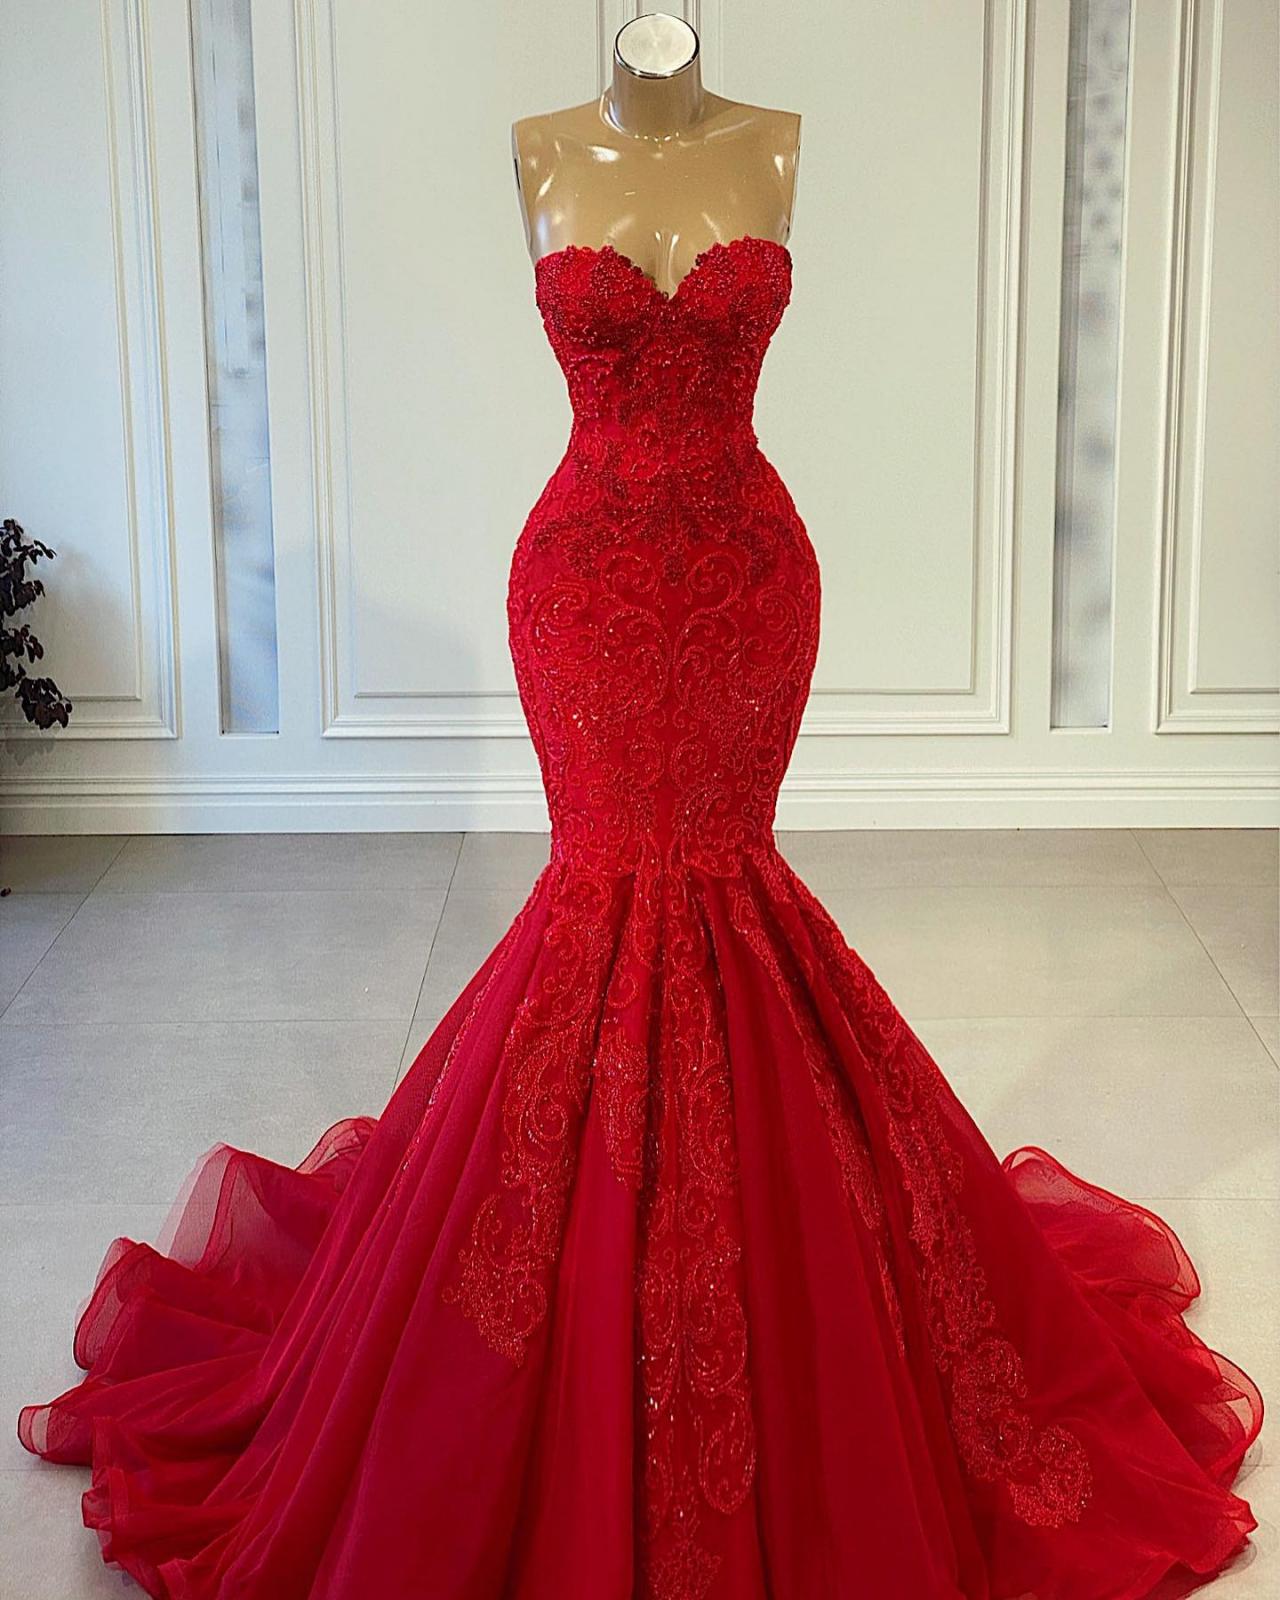 Red Beaded Mermaid Red Corset Prom Dress With High Side Split And Pleats  Customizable For Formal Events And Parties From Shiningirls, $119.6